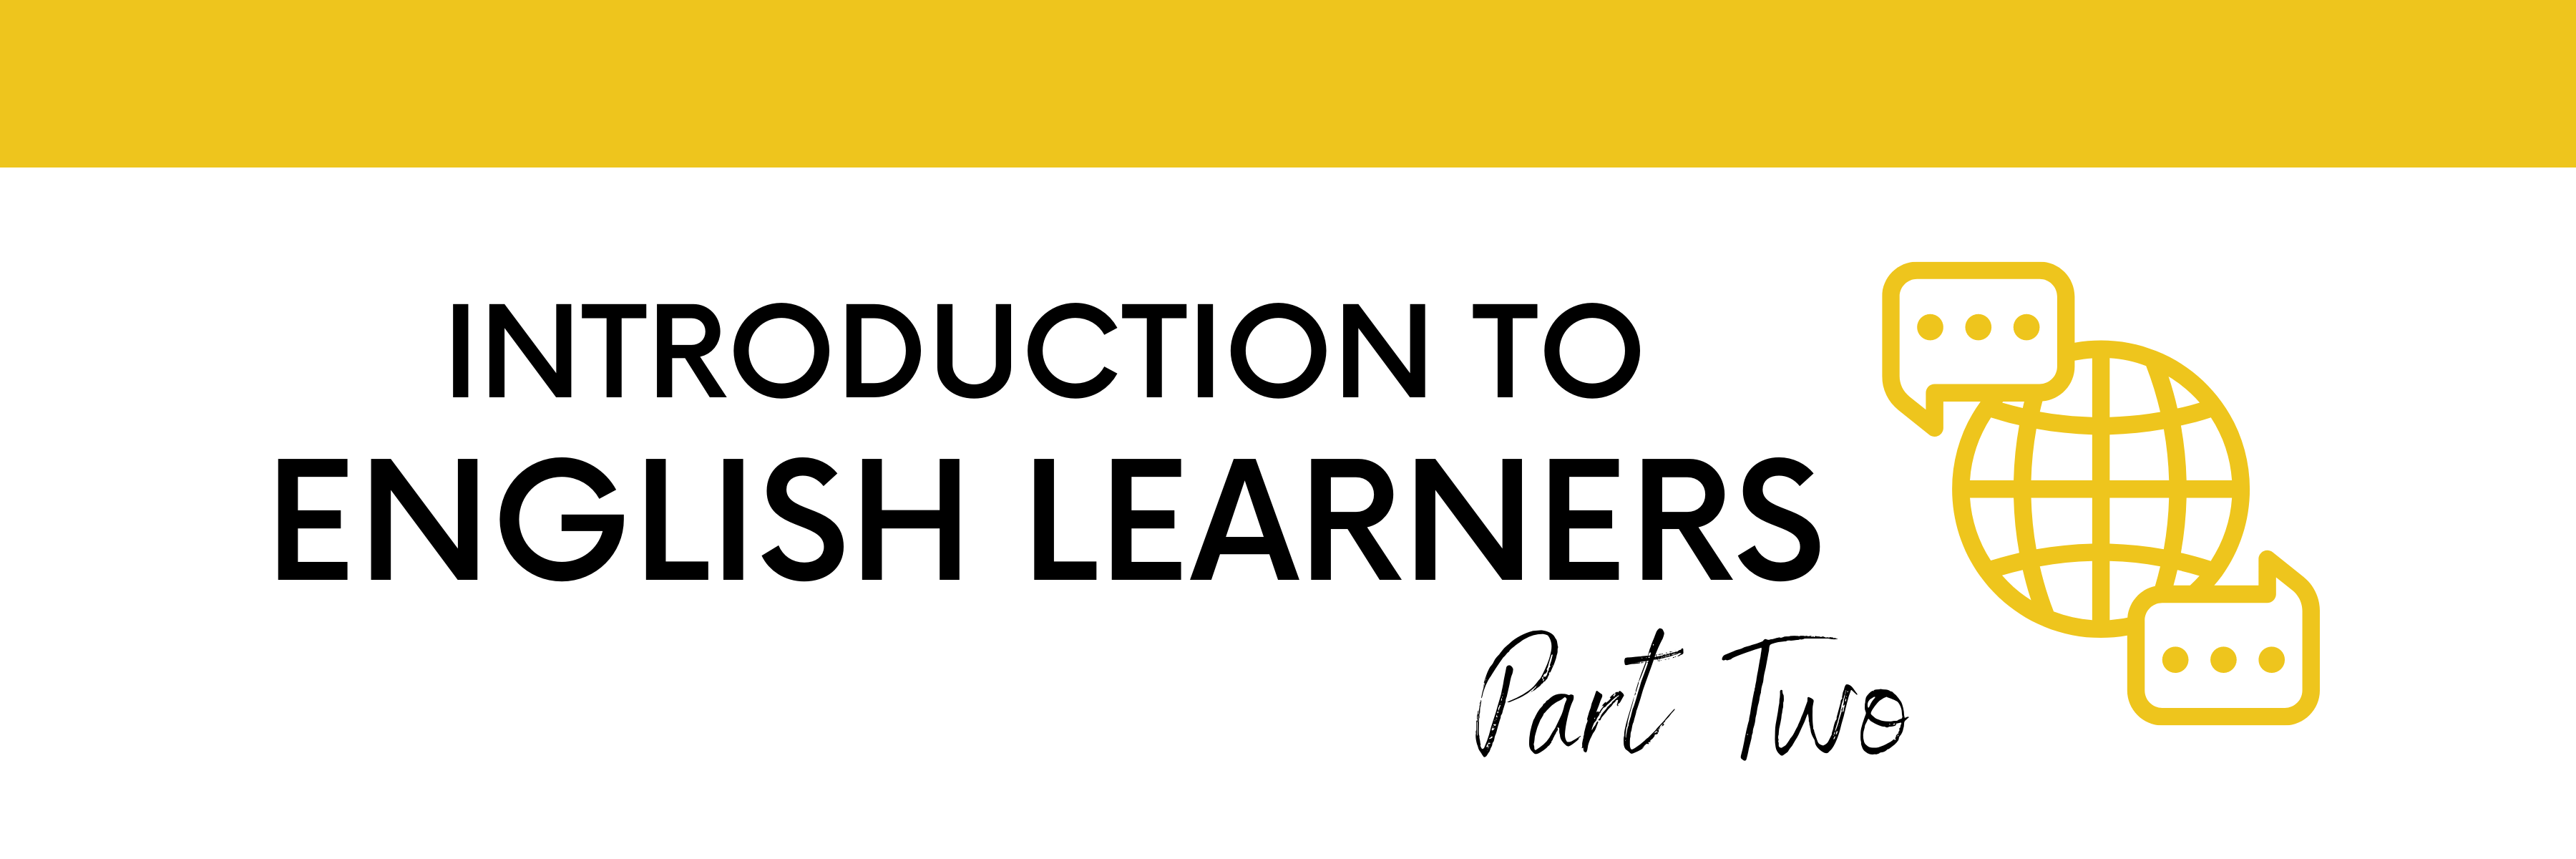 introduction to english learners part 2 header image